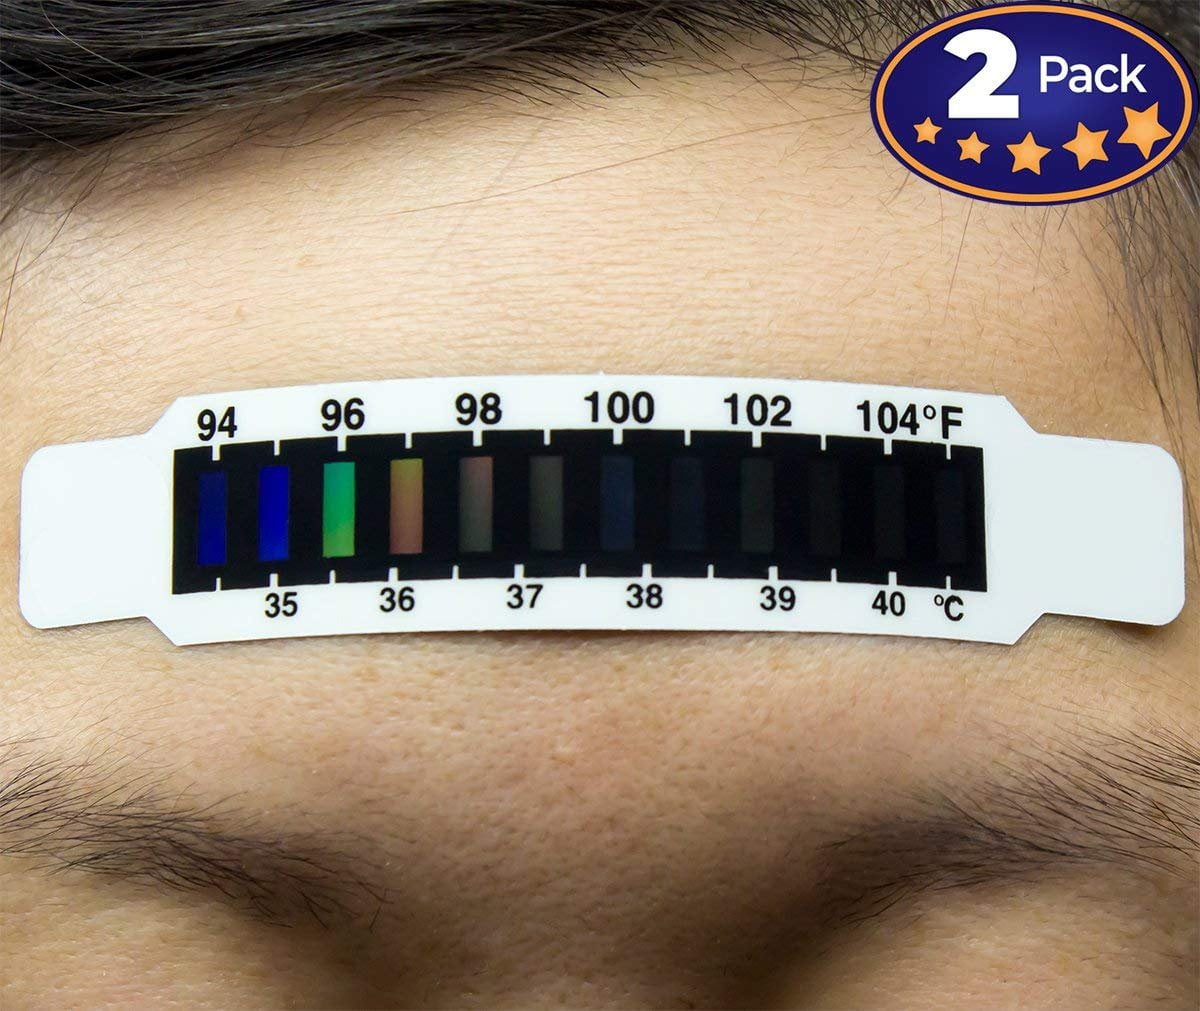 Black TOYANDONA 30Pcs Forehead Thermometer Strip High Precision Forehead Temperature Discoloration Sticker Fever Checking Strip for Kids Adults